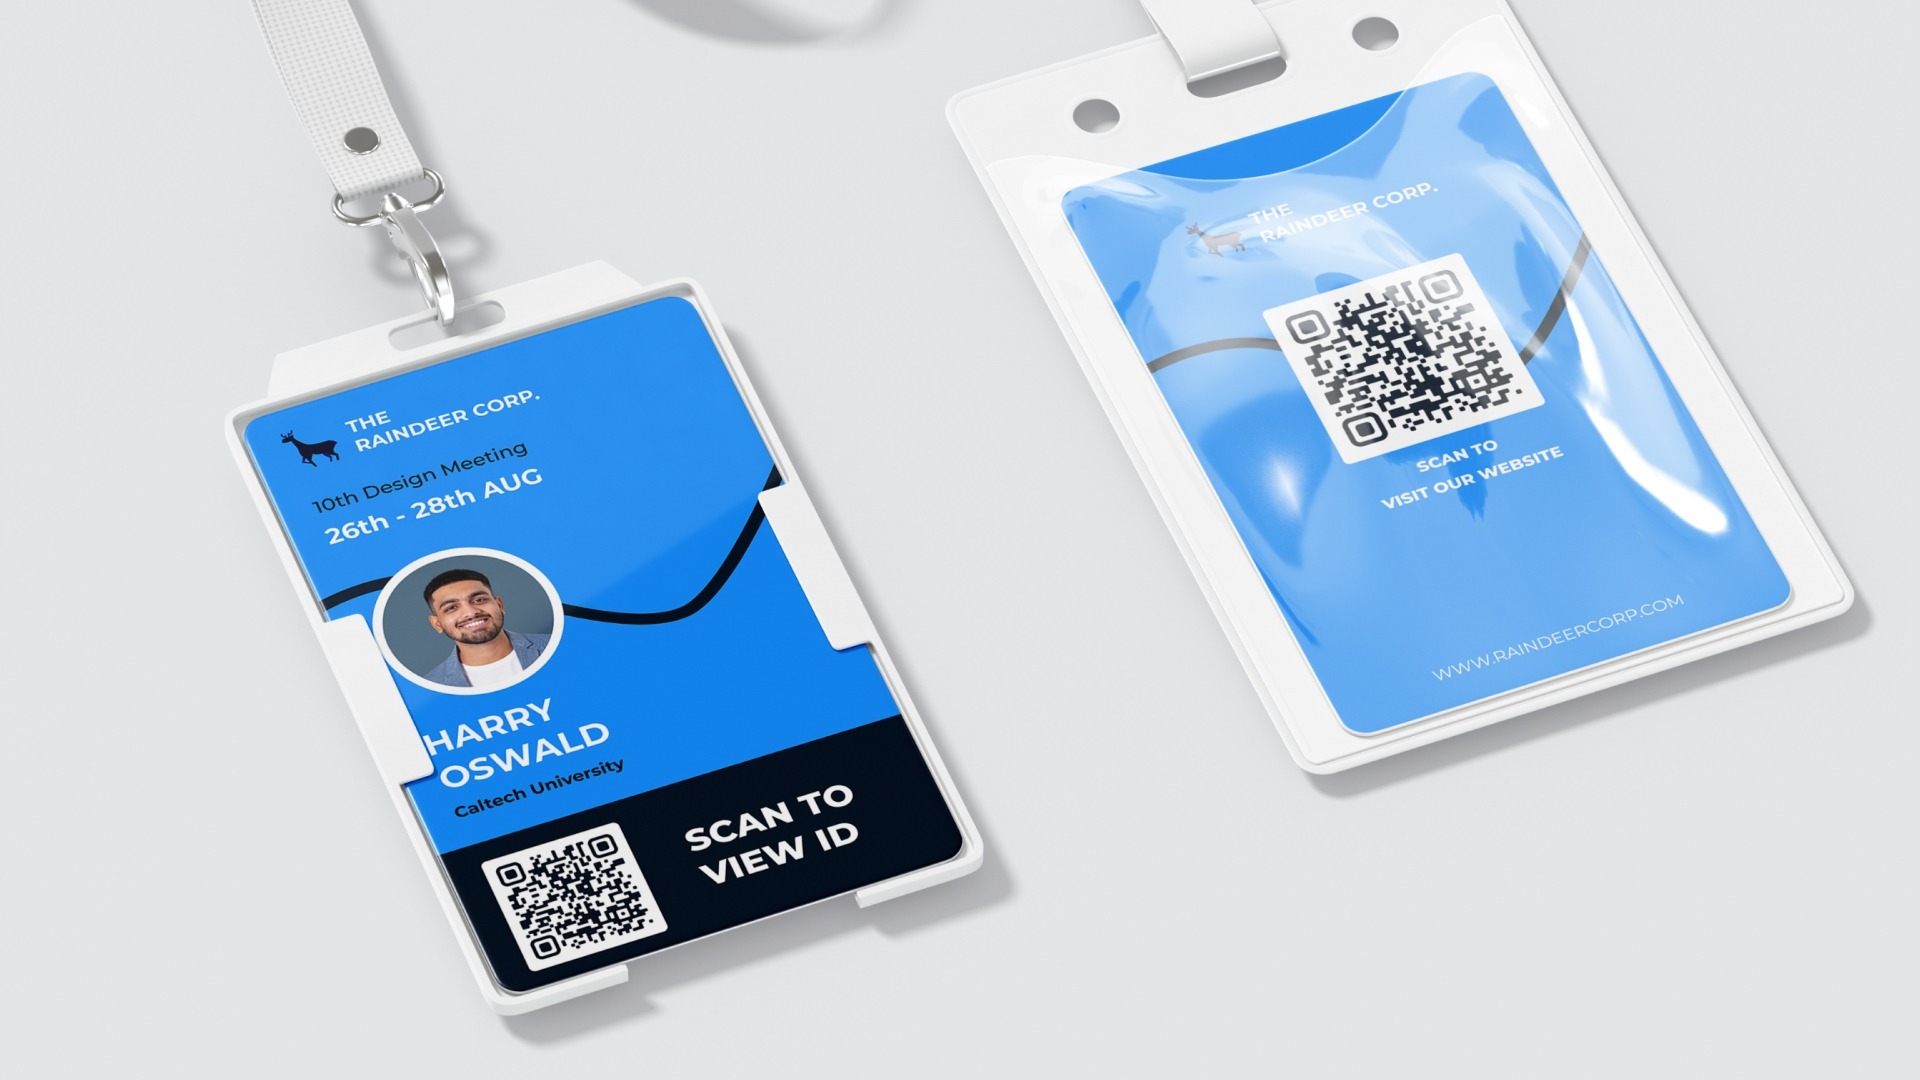 How To Create Interactive QR Codes For a Badge [+Tips]